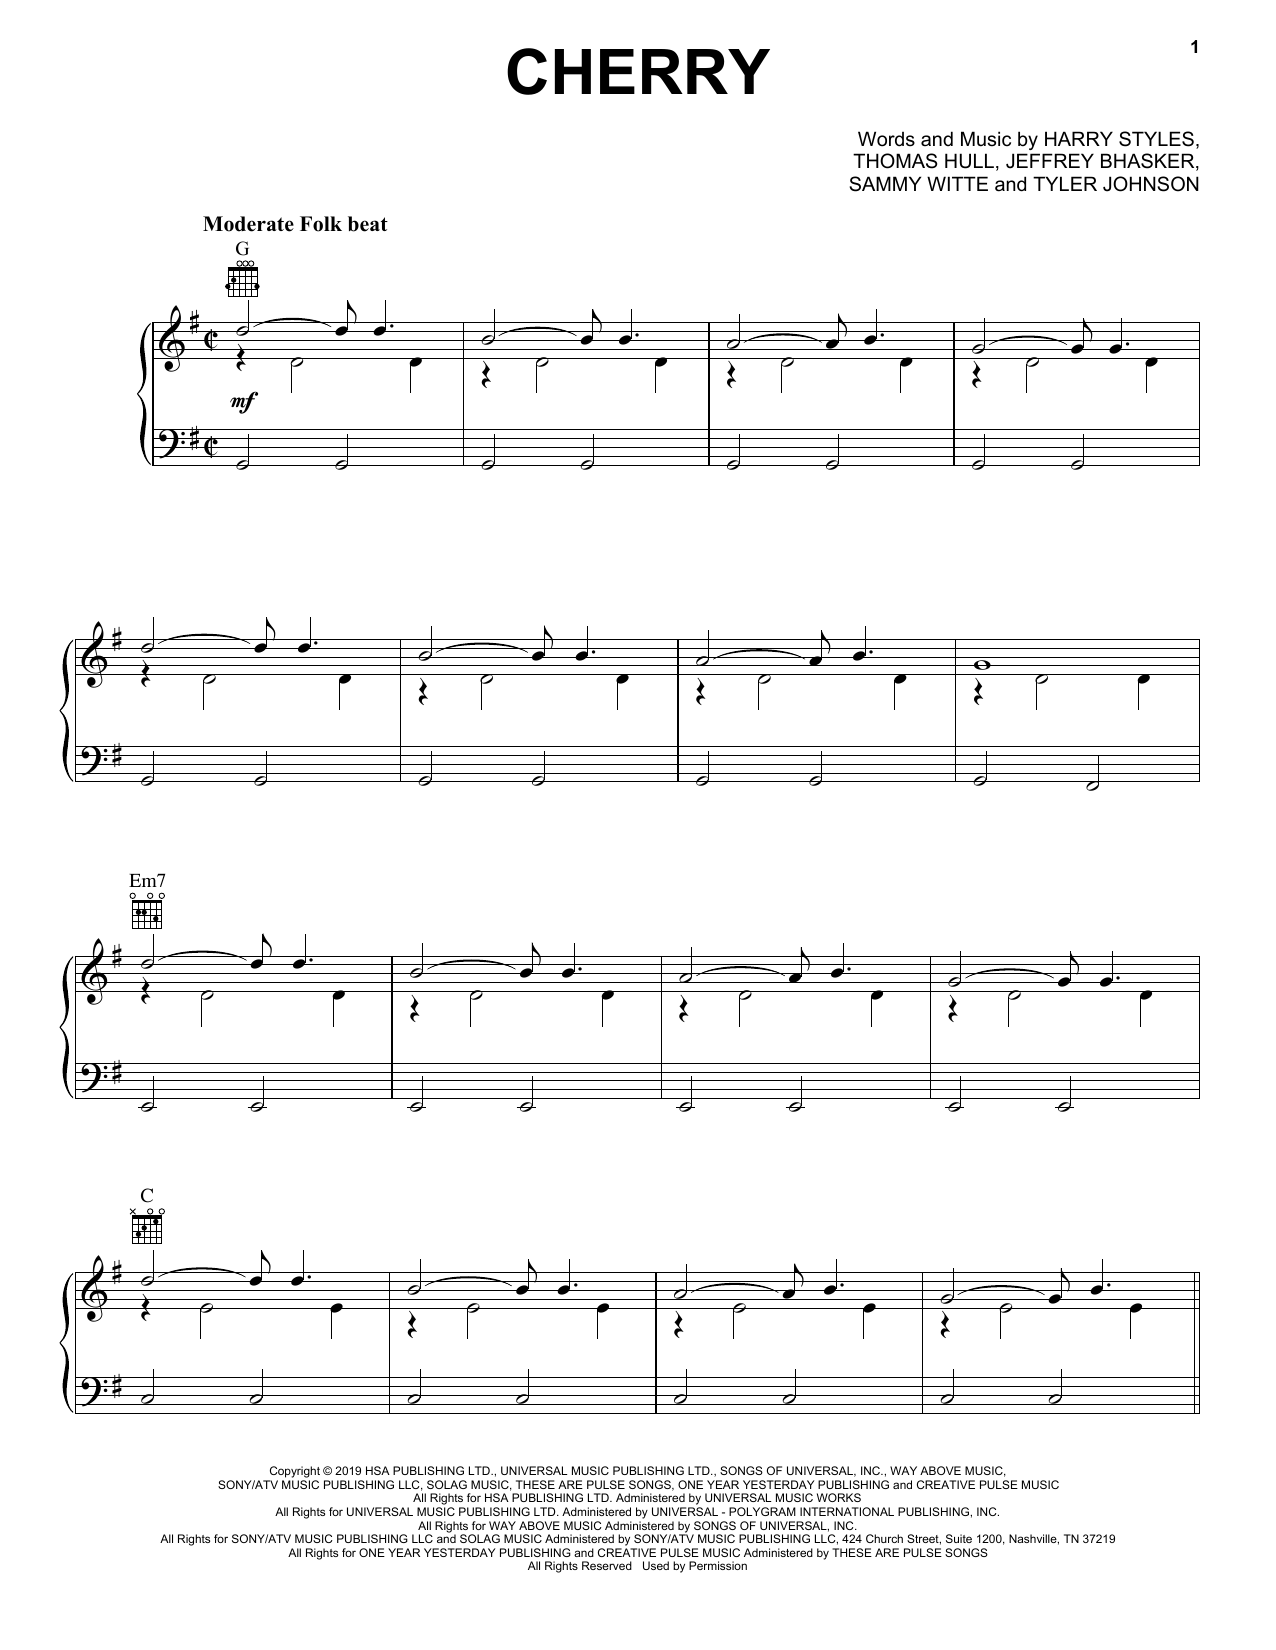 Download Harry Styles Cherry Sheet Music